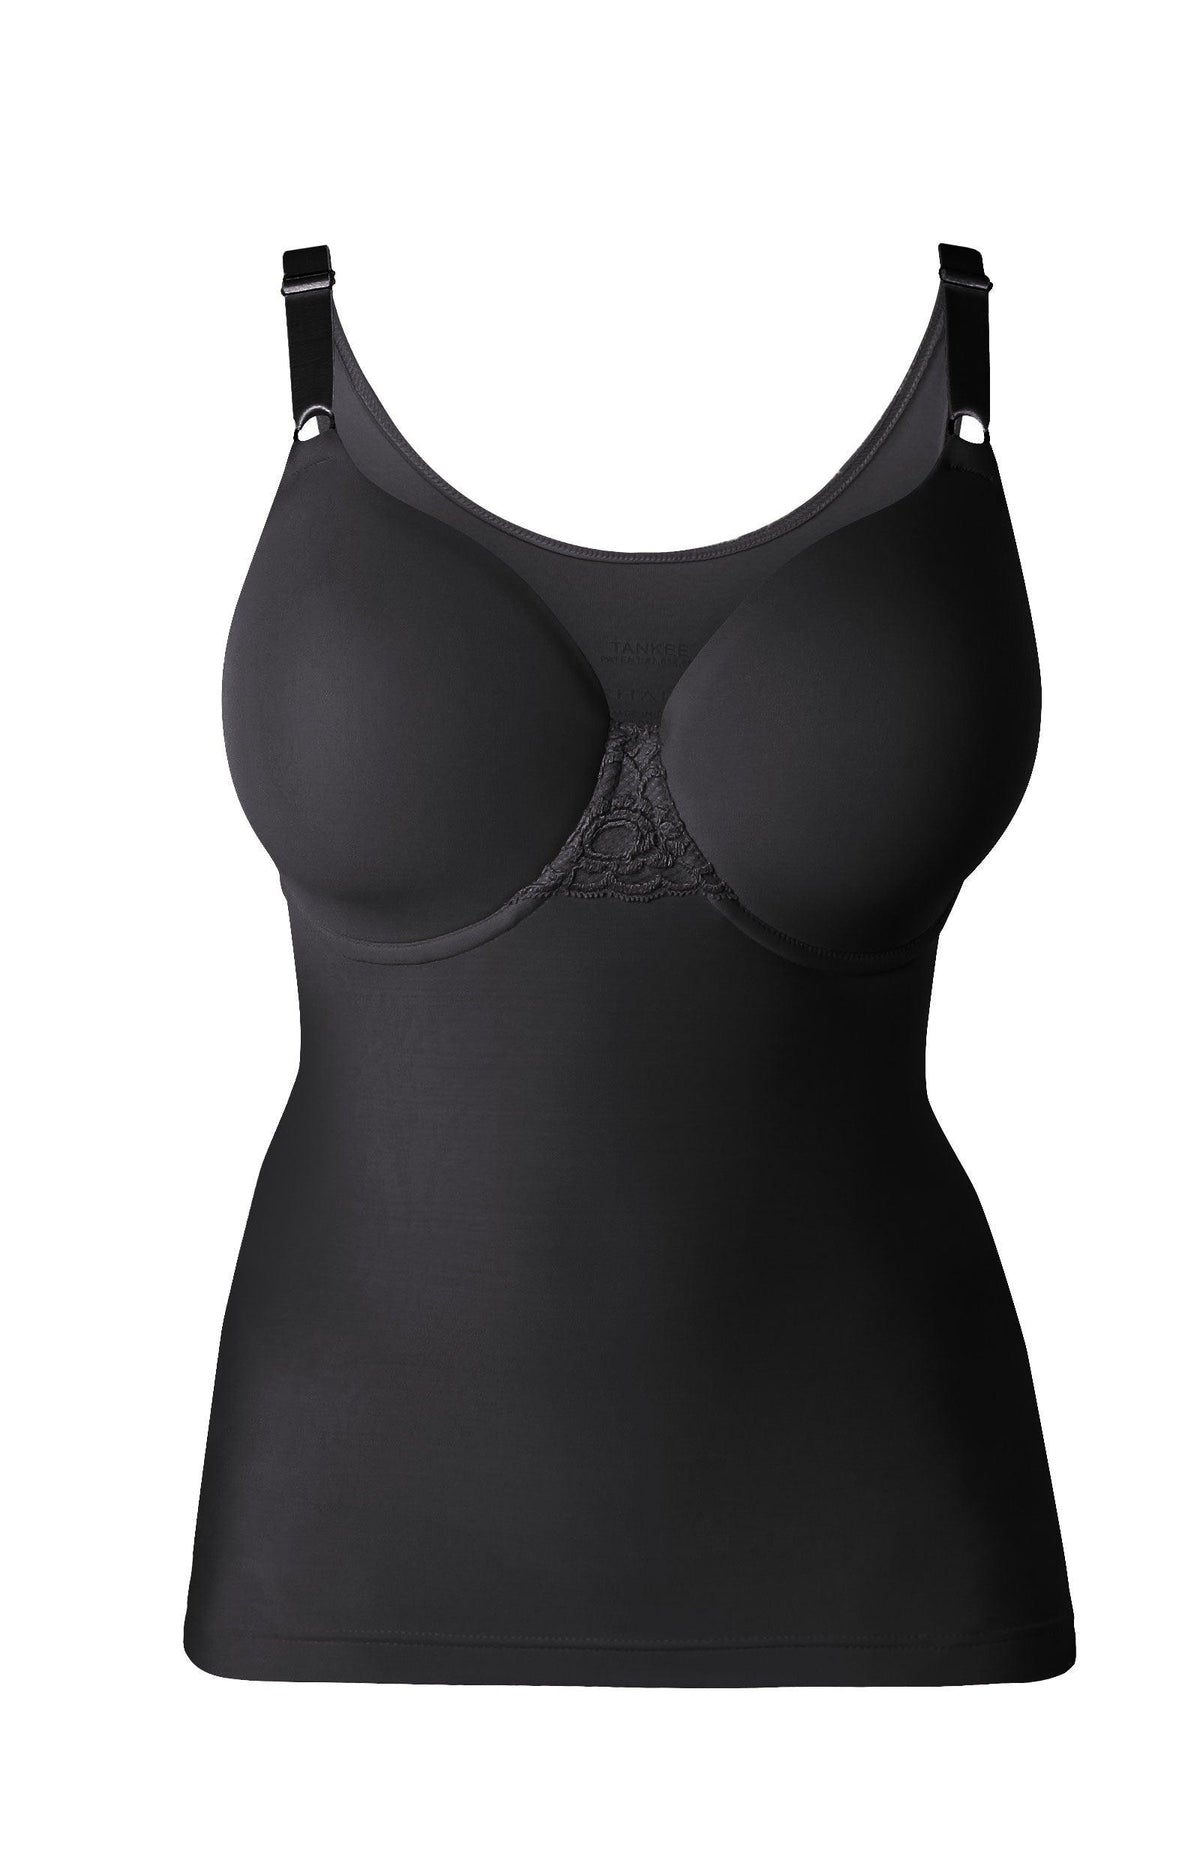 The Tankee Slip with Built-in Foam Bra and Adjustable Straps, Shapeez